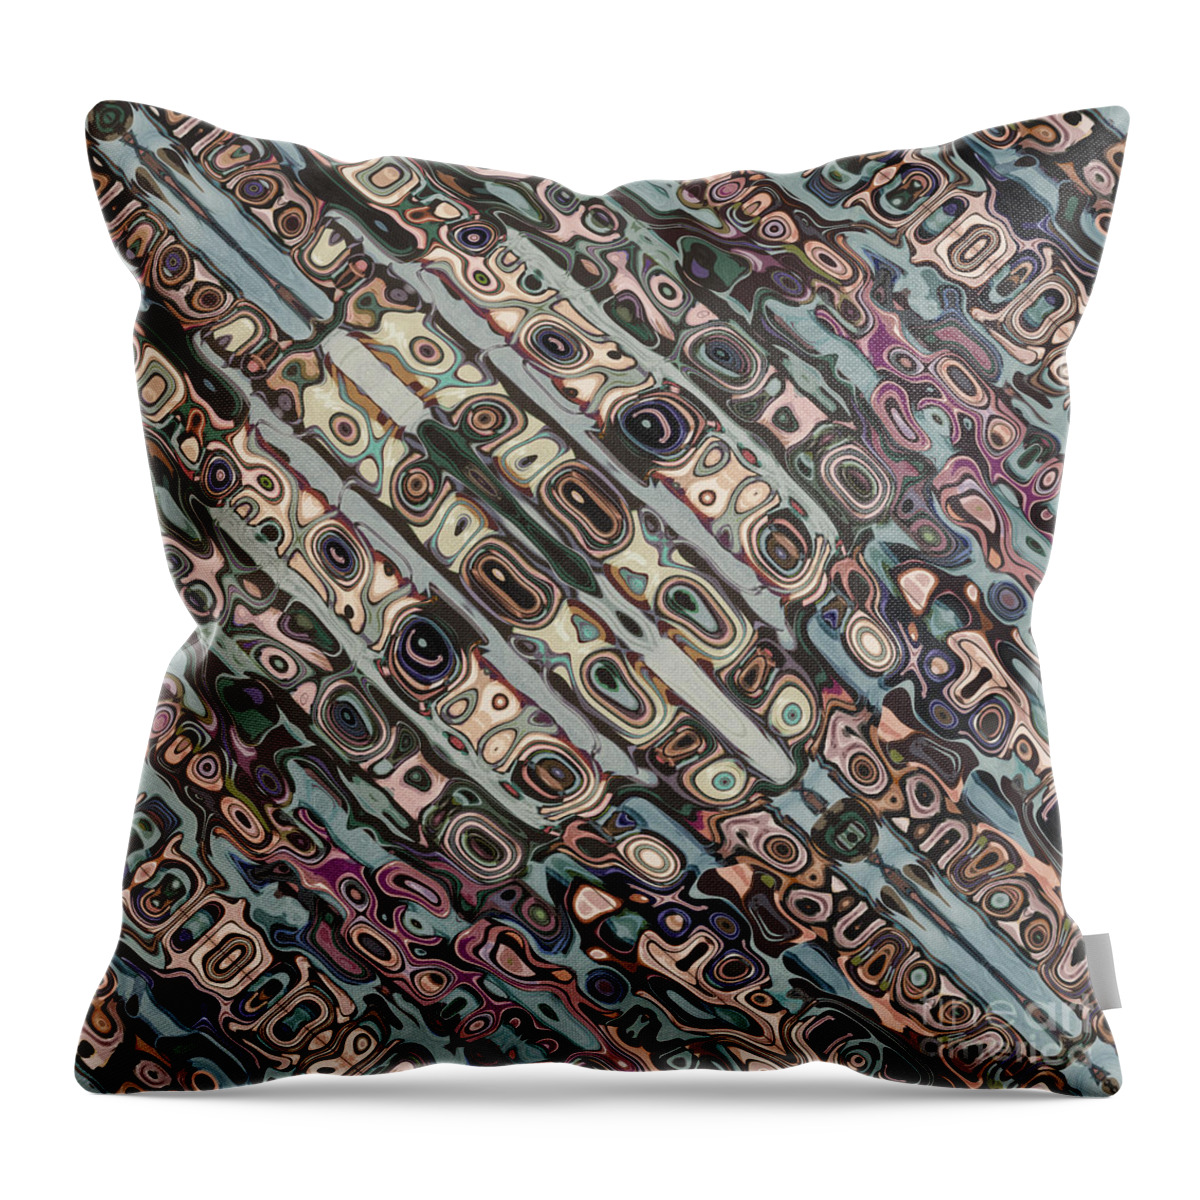 Diagonal Throw Pillow featuring the digital art Abstract Textured Earth Tones Pattern by Phil Perkins